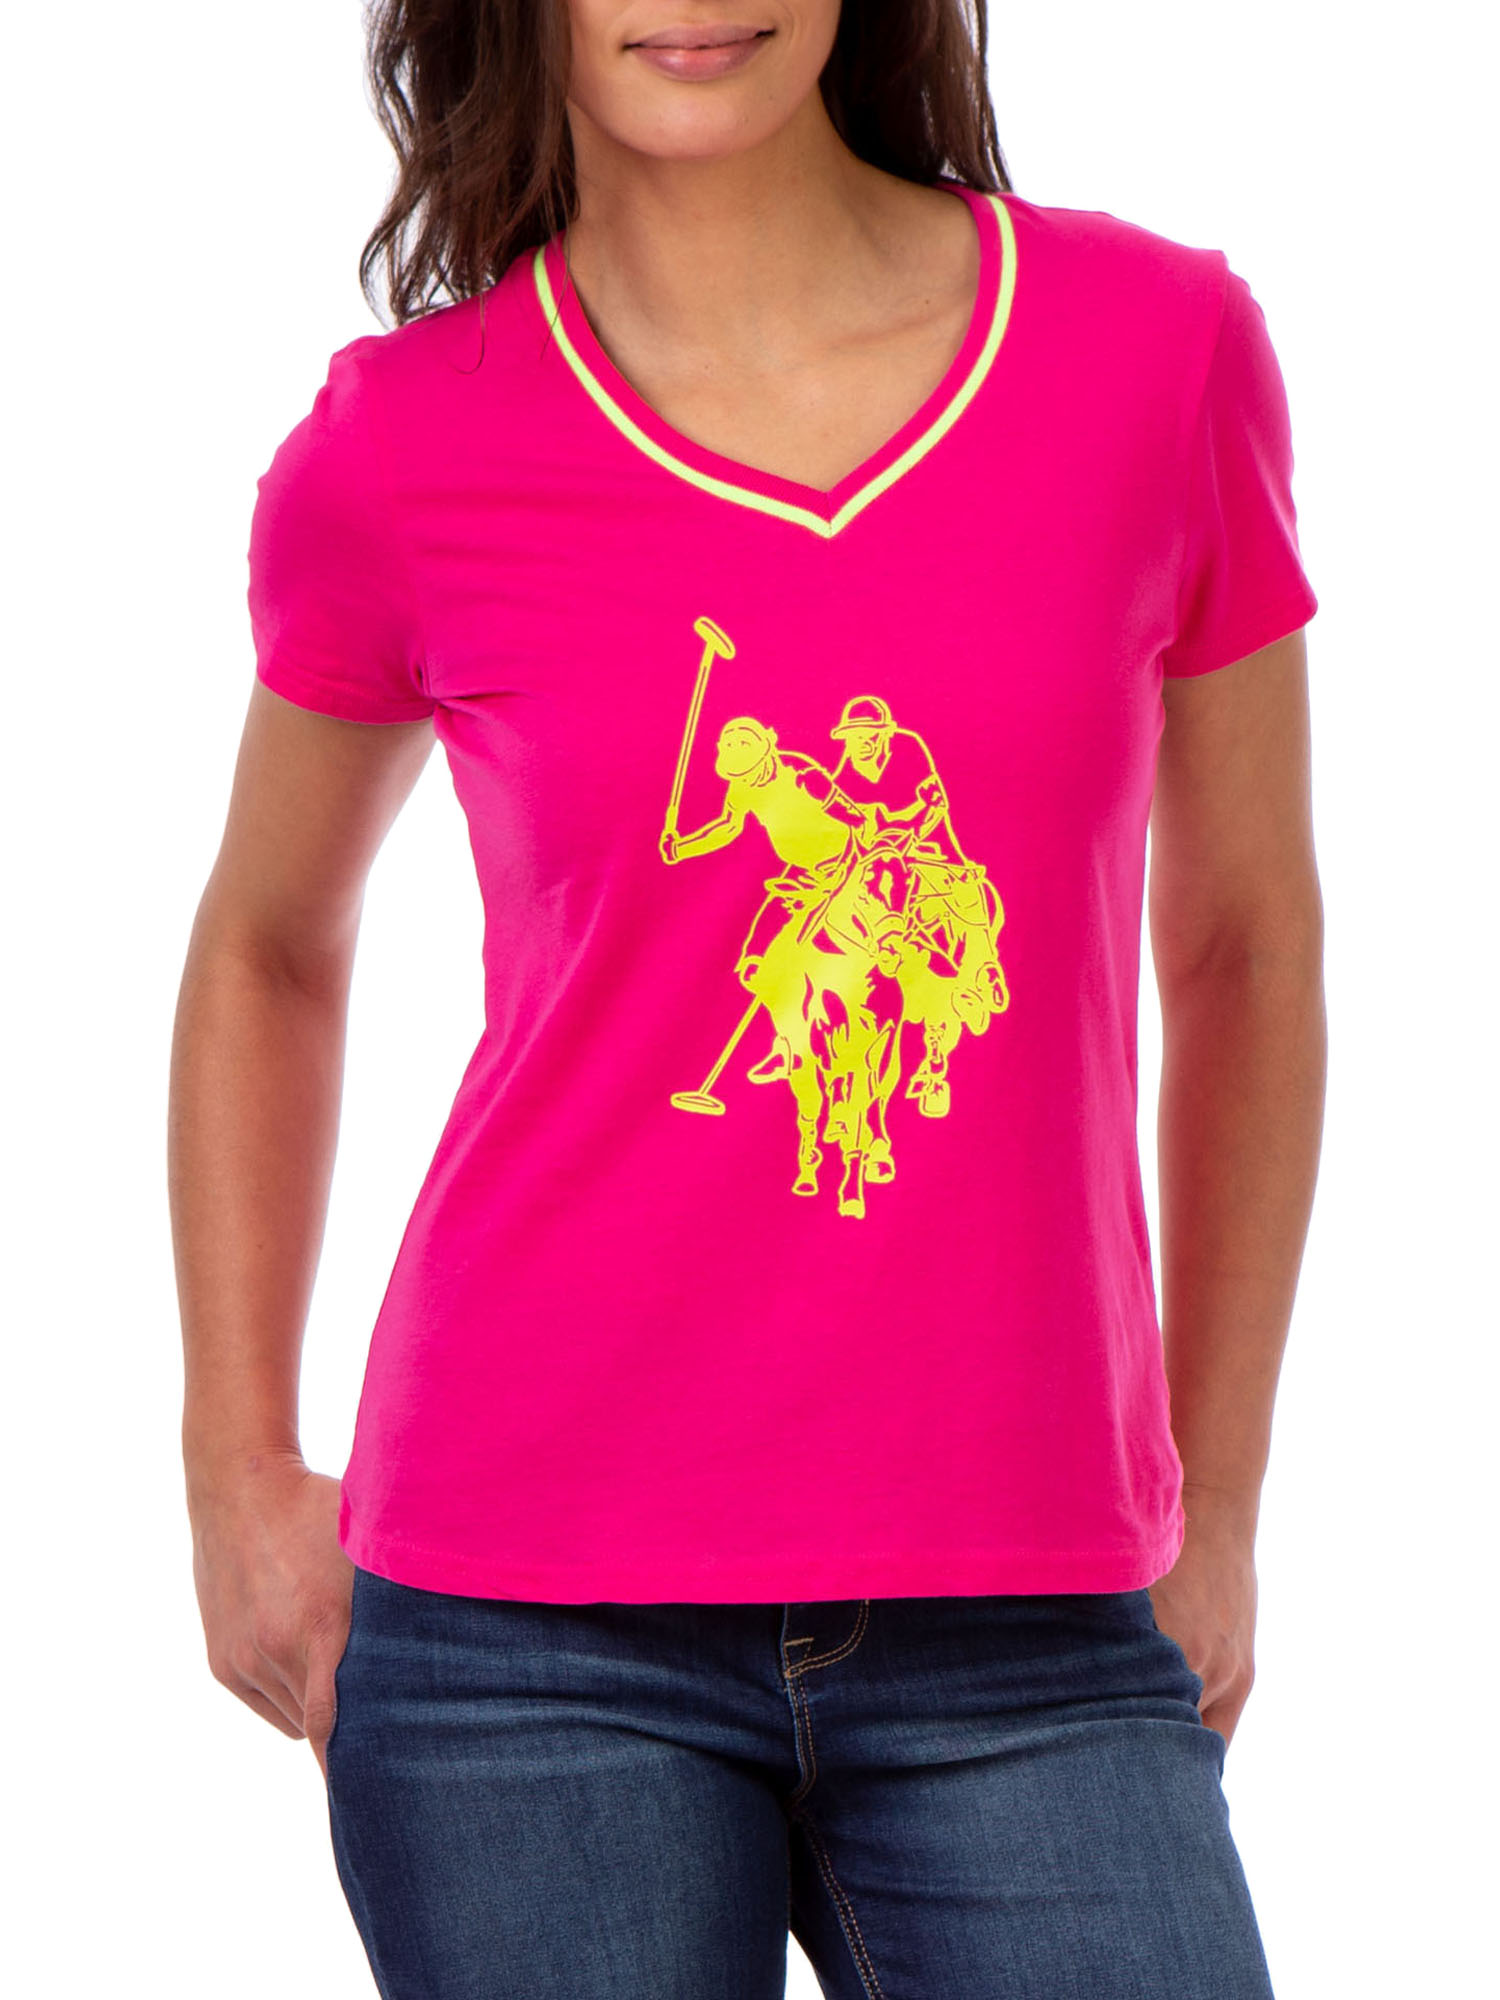 US Polo Assn. Short Sleeve Graphic V-Neck T-Shirt (Women's) 1 Pack - image 1 of 2